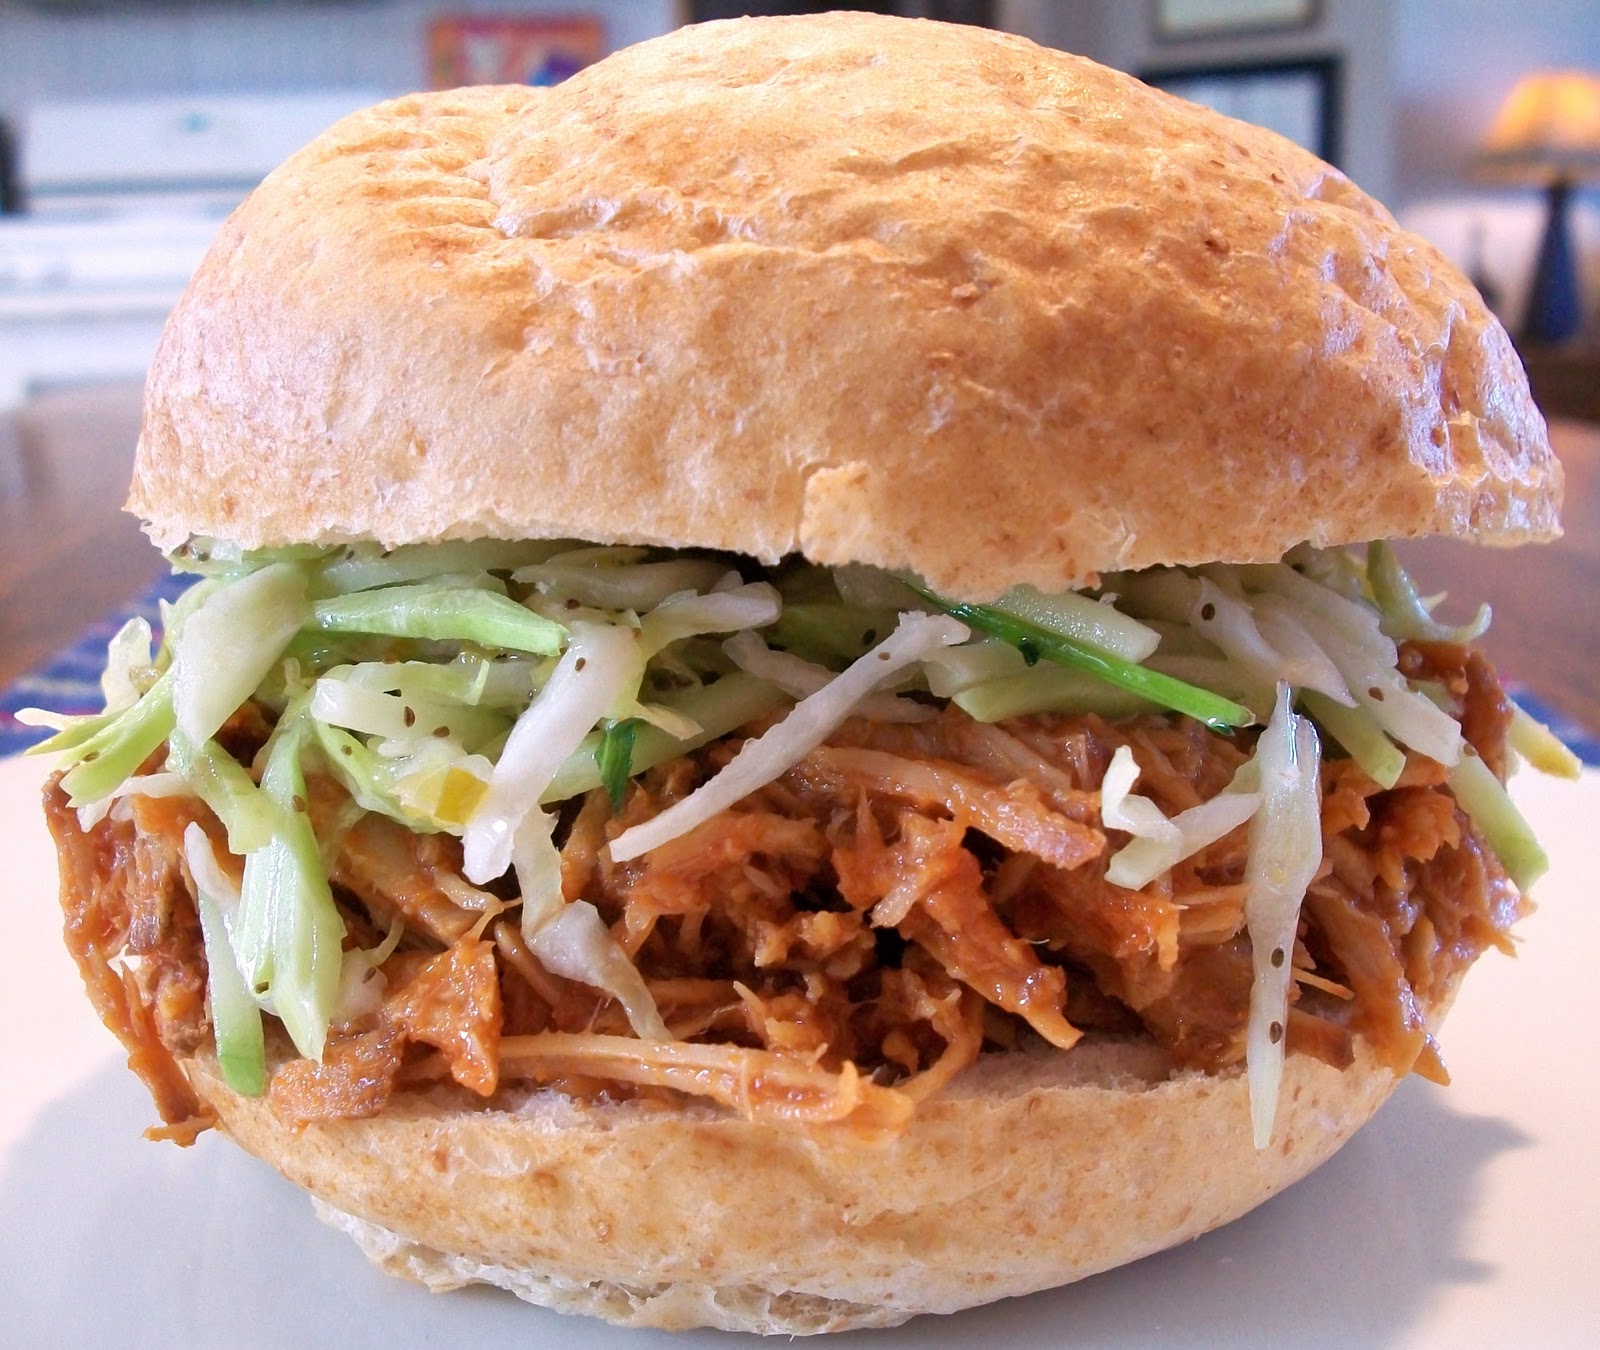 My Kind of Cooking: Pulled Pork Sandwiches with Mexican Coleslaw